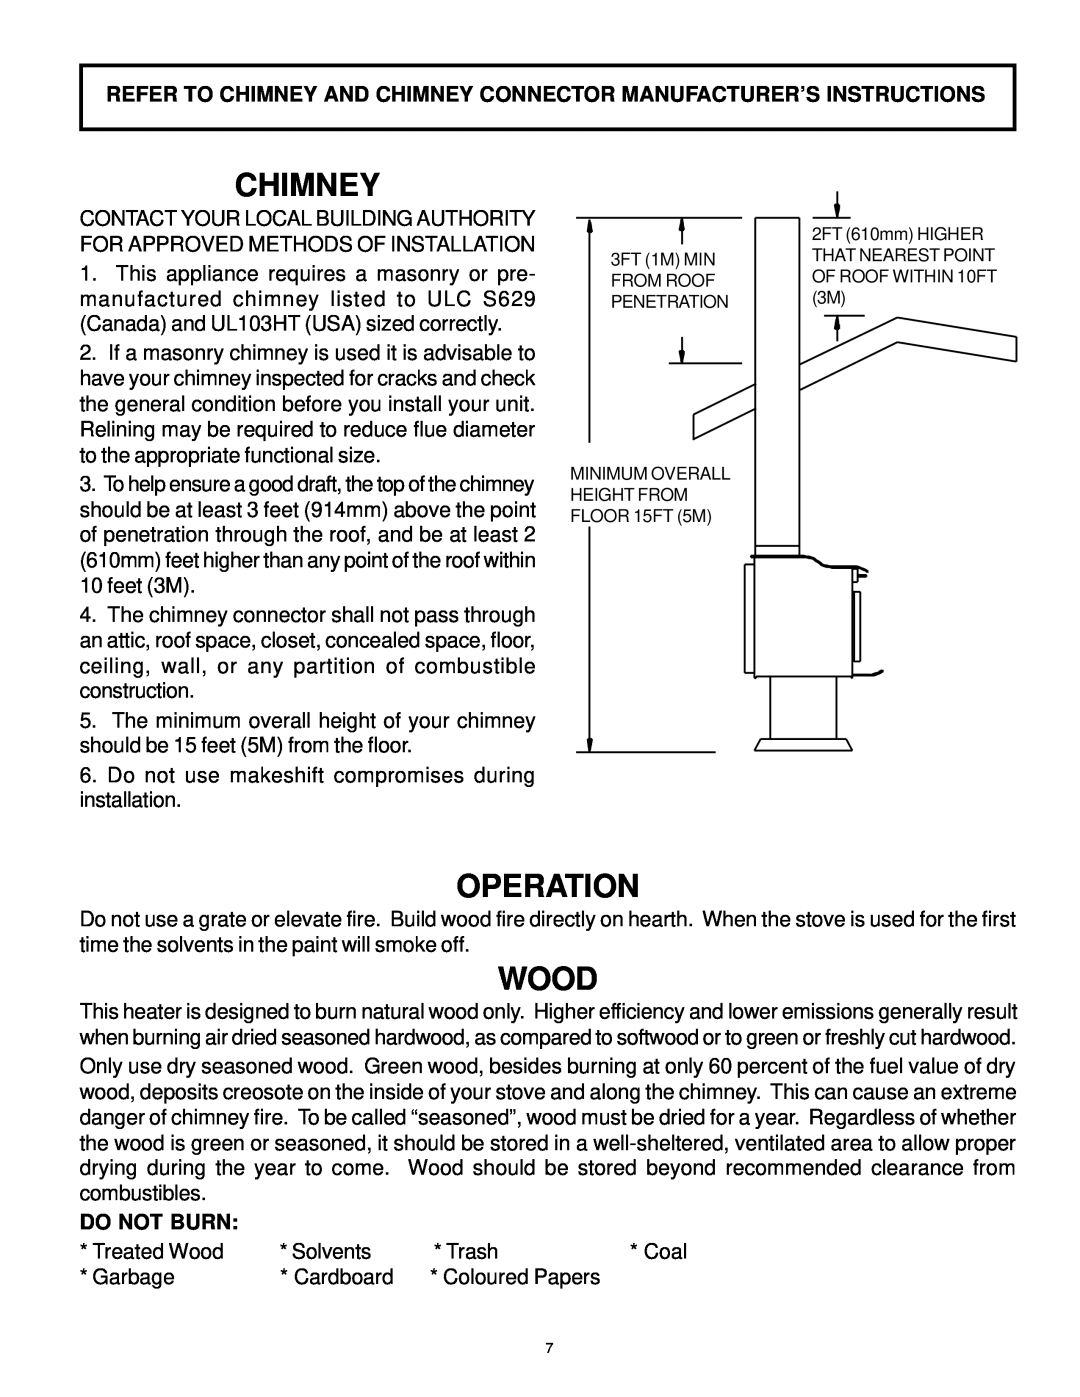 Vermont Casting WOOD STOVE owner manual Chimney, Wood, Operation, Do Not Burn 